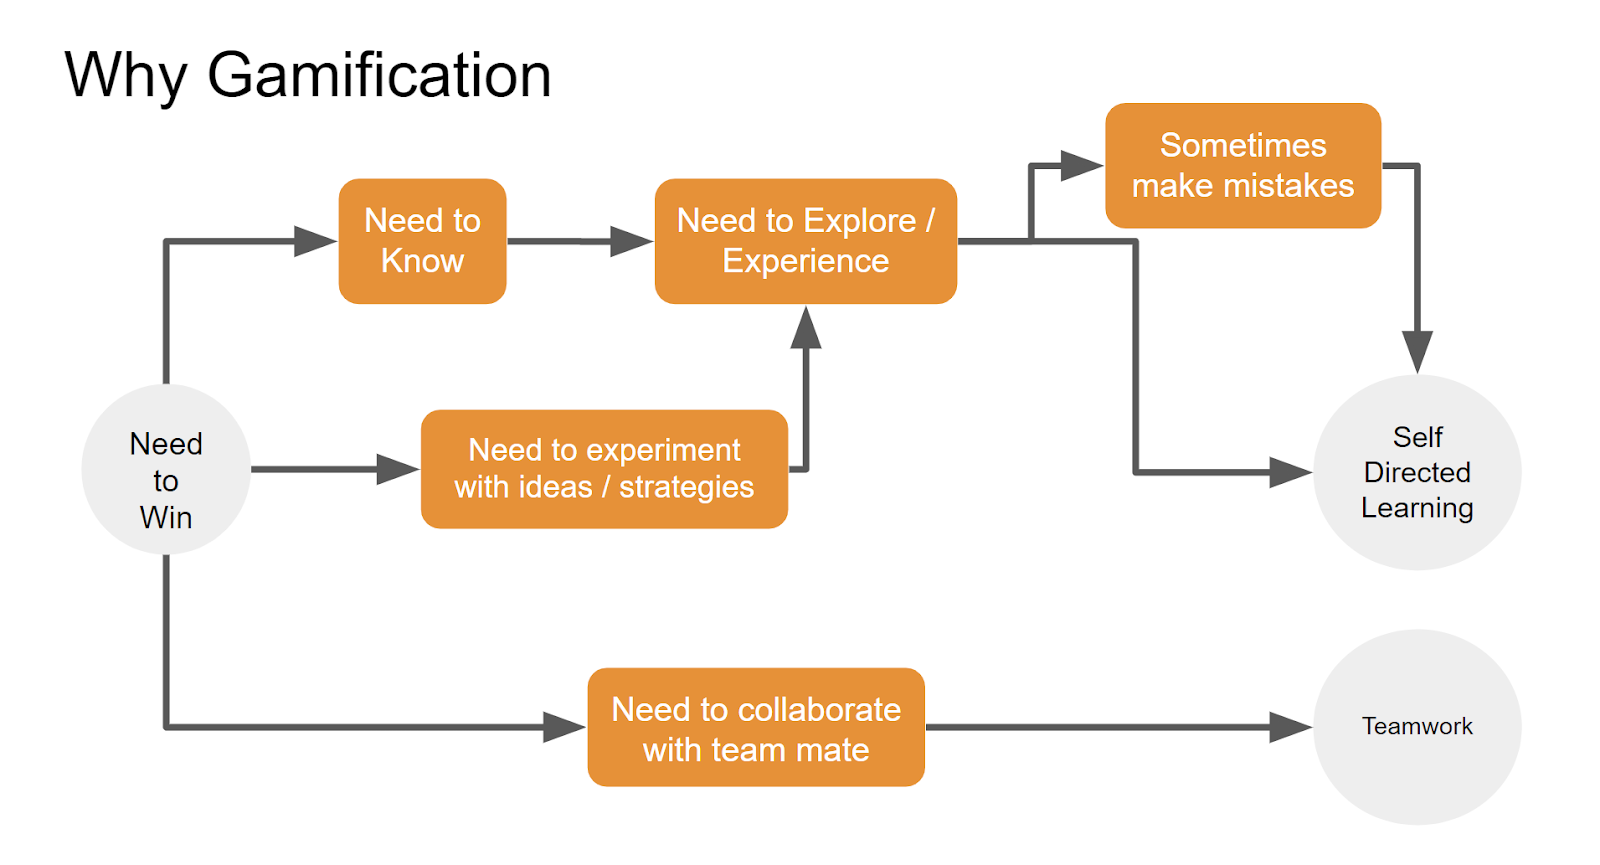 A flowchart titled 'Why Gamification.' Starting with a circle labeled 'Need to Win,' it connects to an orange rectangle reading 'Need to Know' which then leads to 'Need to Explore/Experience.' This further connects to 'Need to experiment with ideas/strategies' which points to two more sections: an orange rectangle labeled 'Sometimes make mistakes' and another rectangle reading 'Need to collaborate with team mate.' The final segments are circles labeled 'Self Directed Learning' and 'Teamwork' respectively